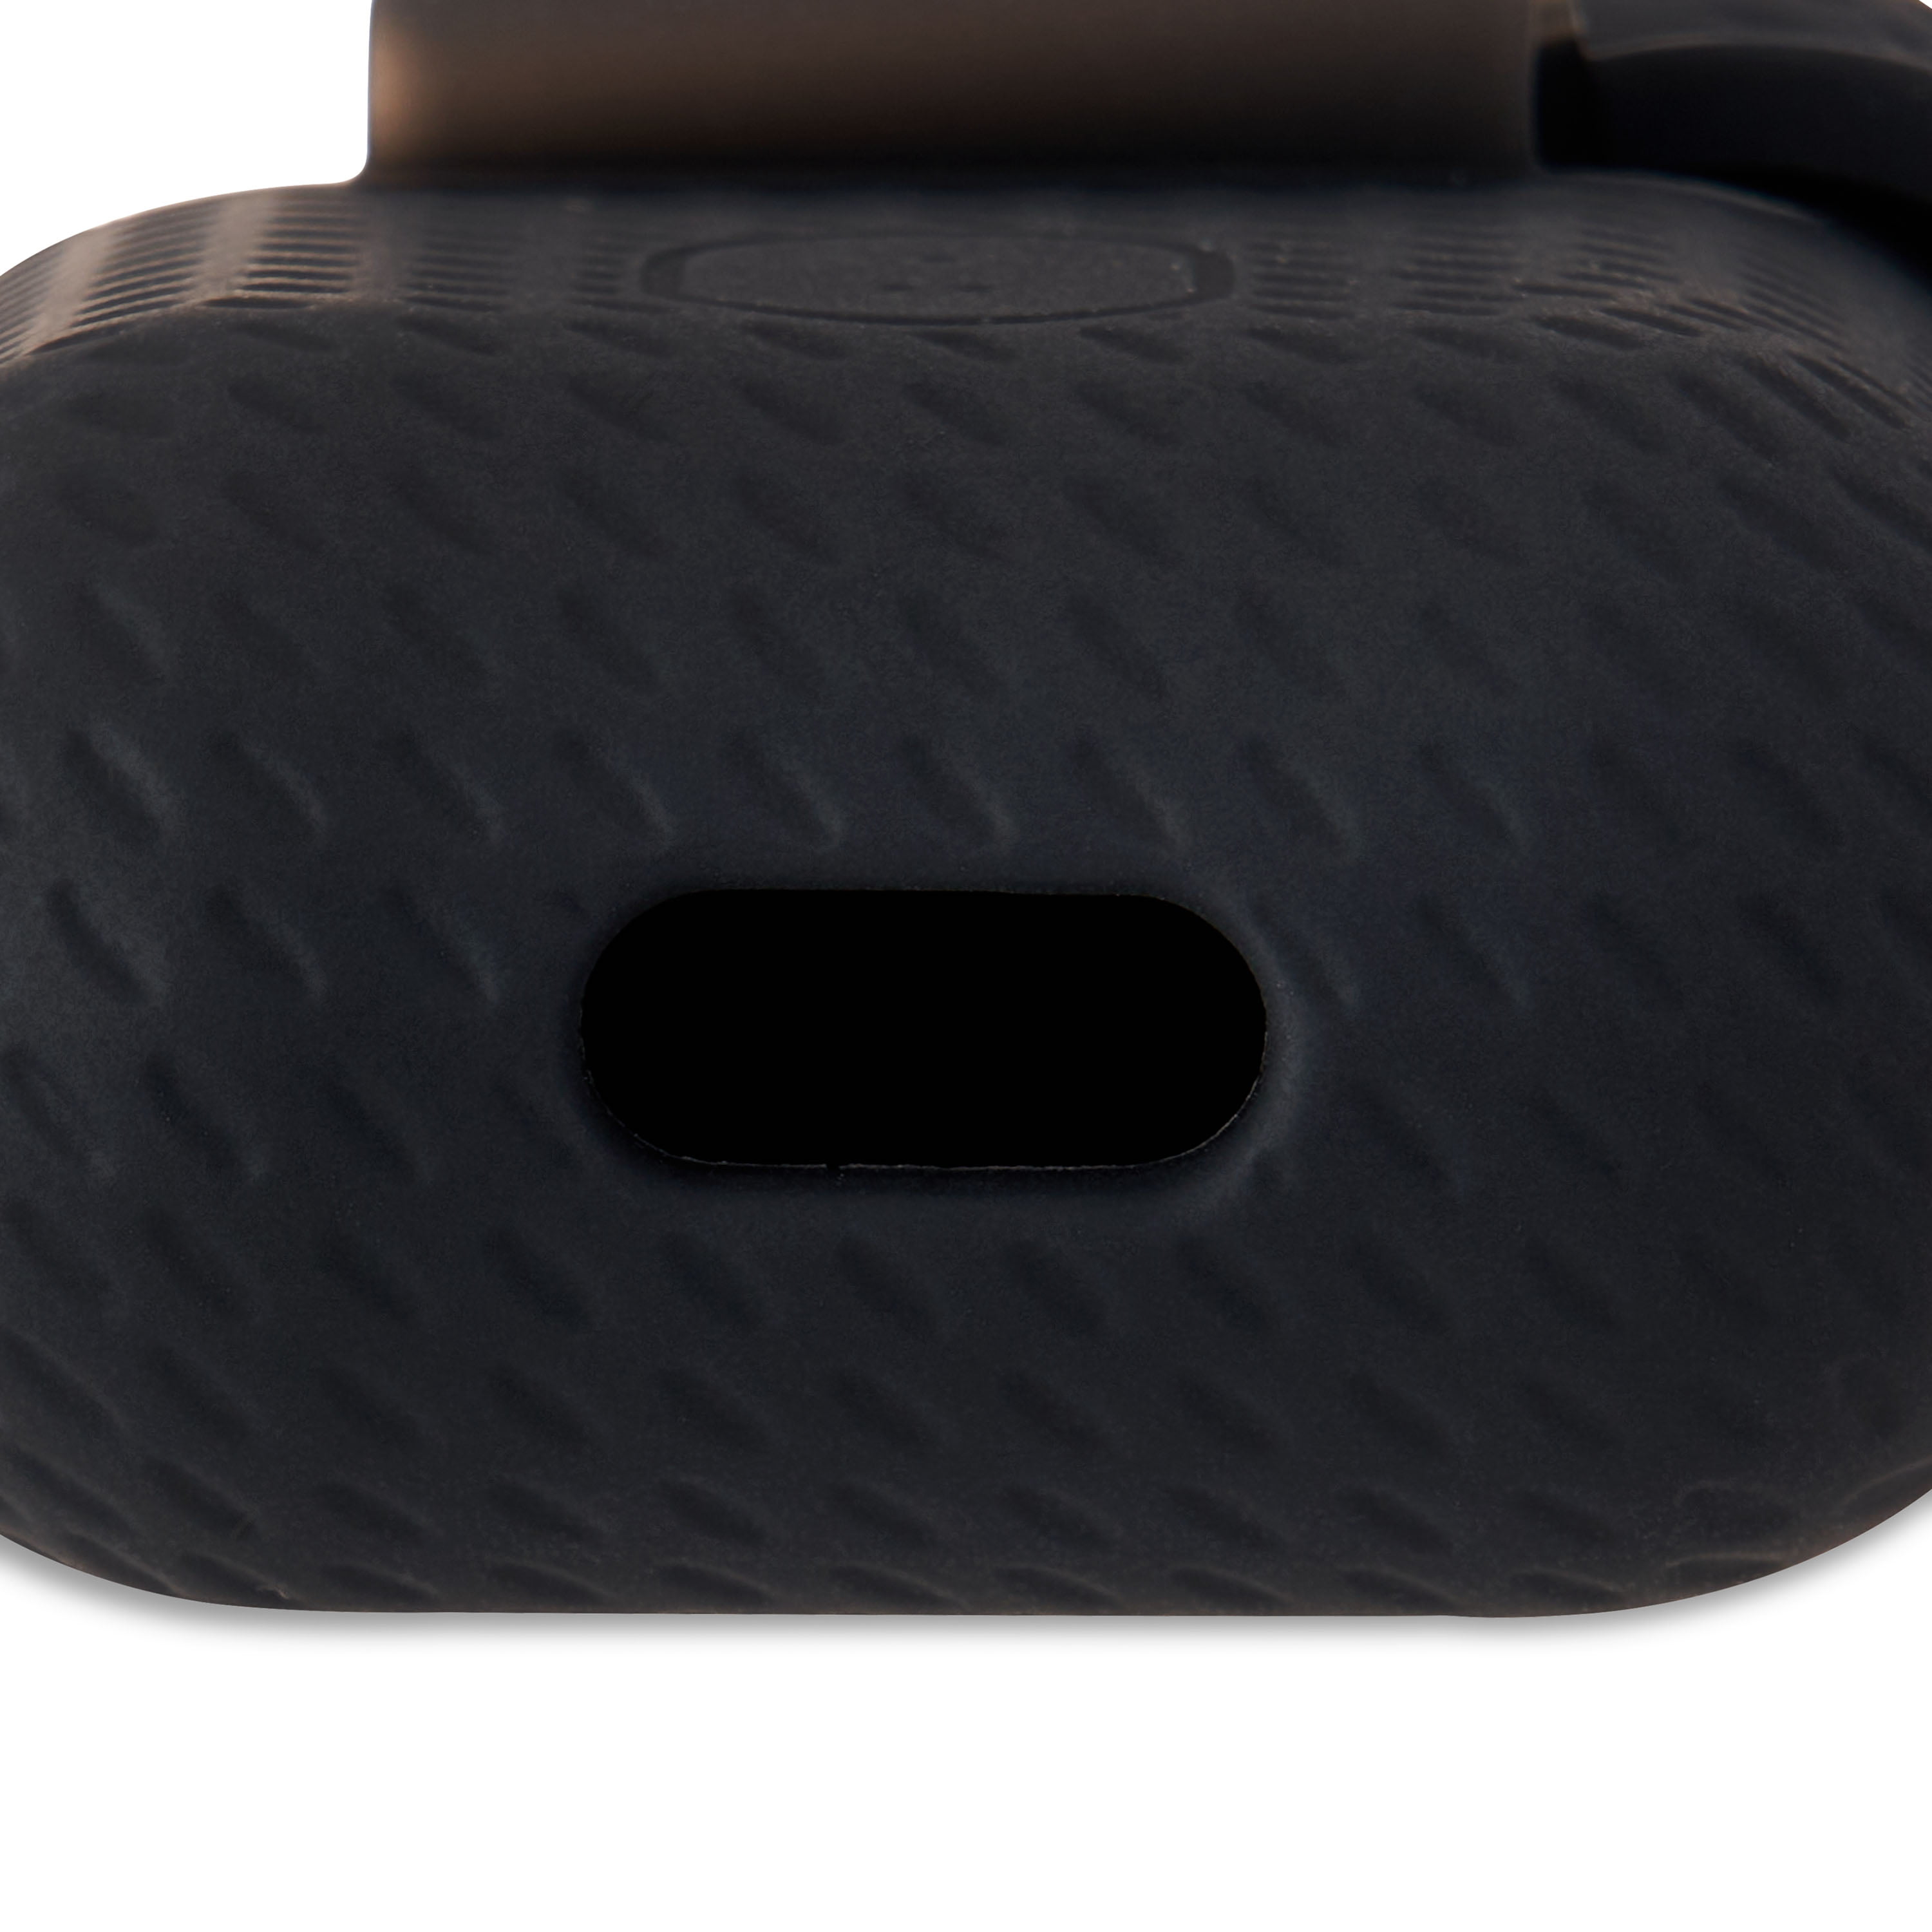 Black Textured Cover for AirPods Charging Case